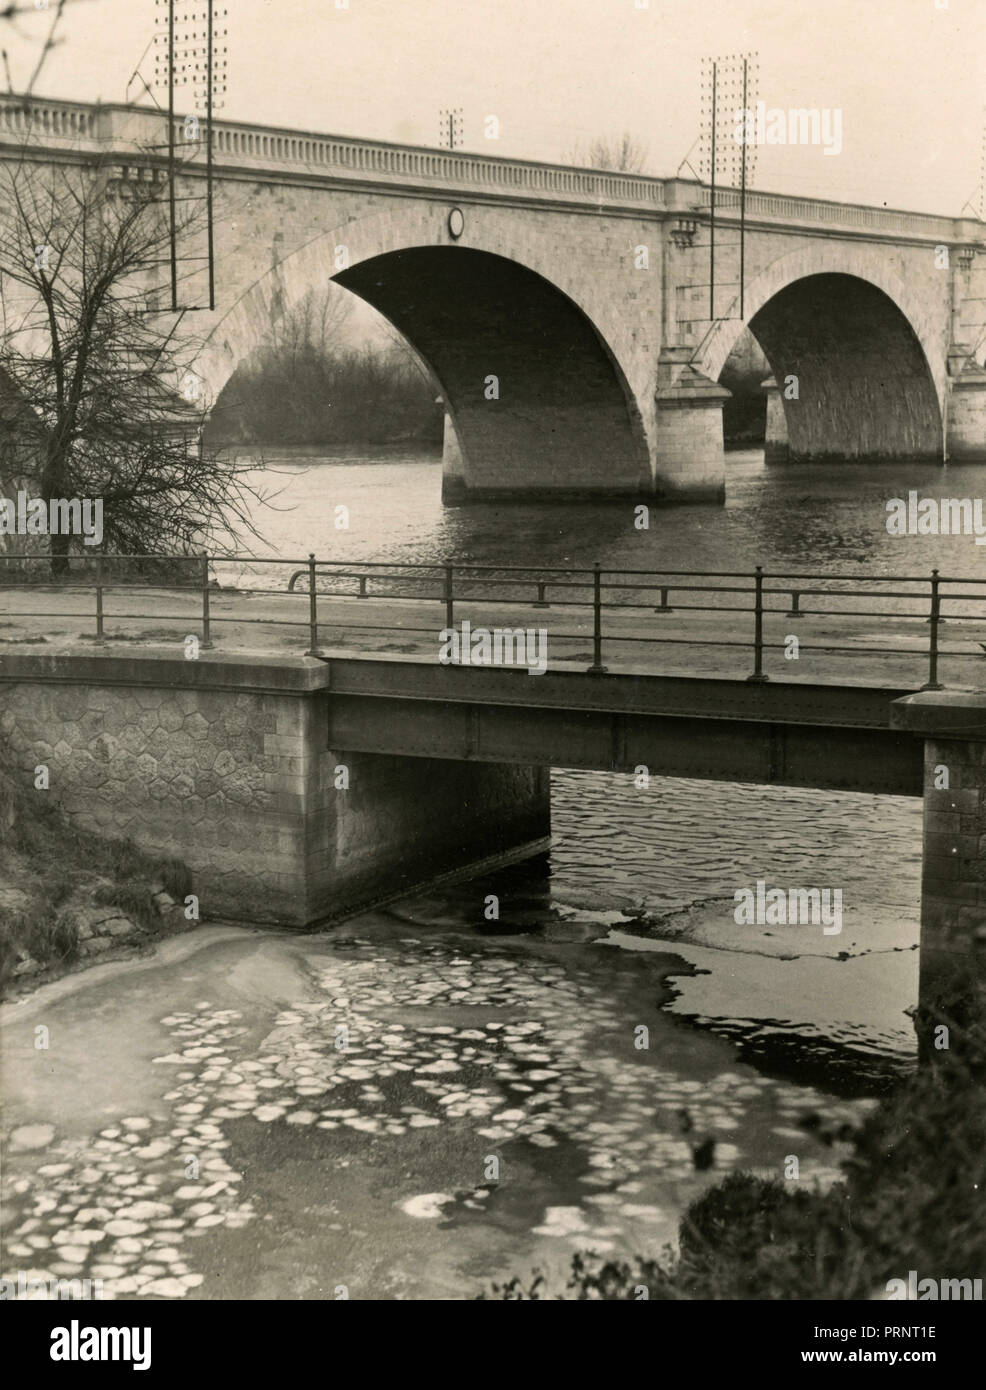 The river Vaucouleurs meeting the river Seine, Mantes, France 1938 Stock Photo